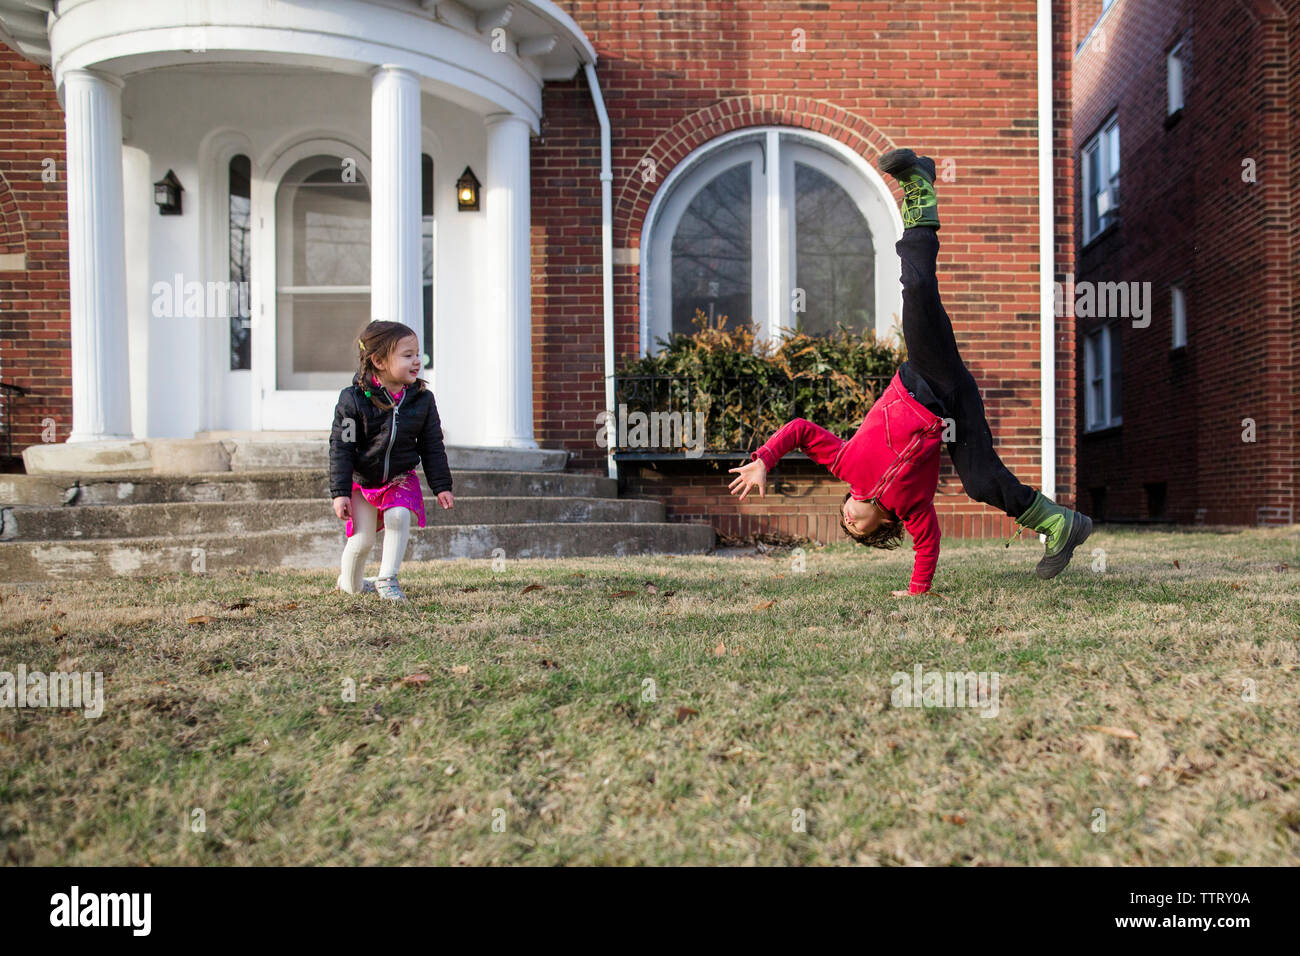 Sister looking at brother practicing cartwheel on lawn against house Stock Photo